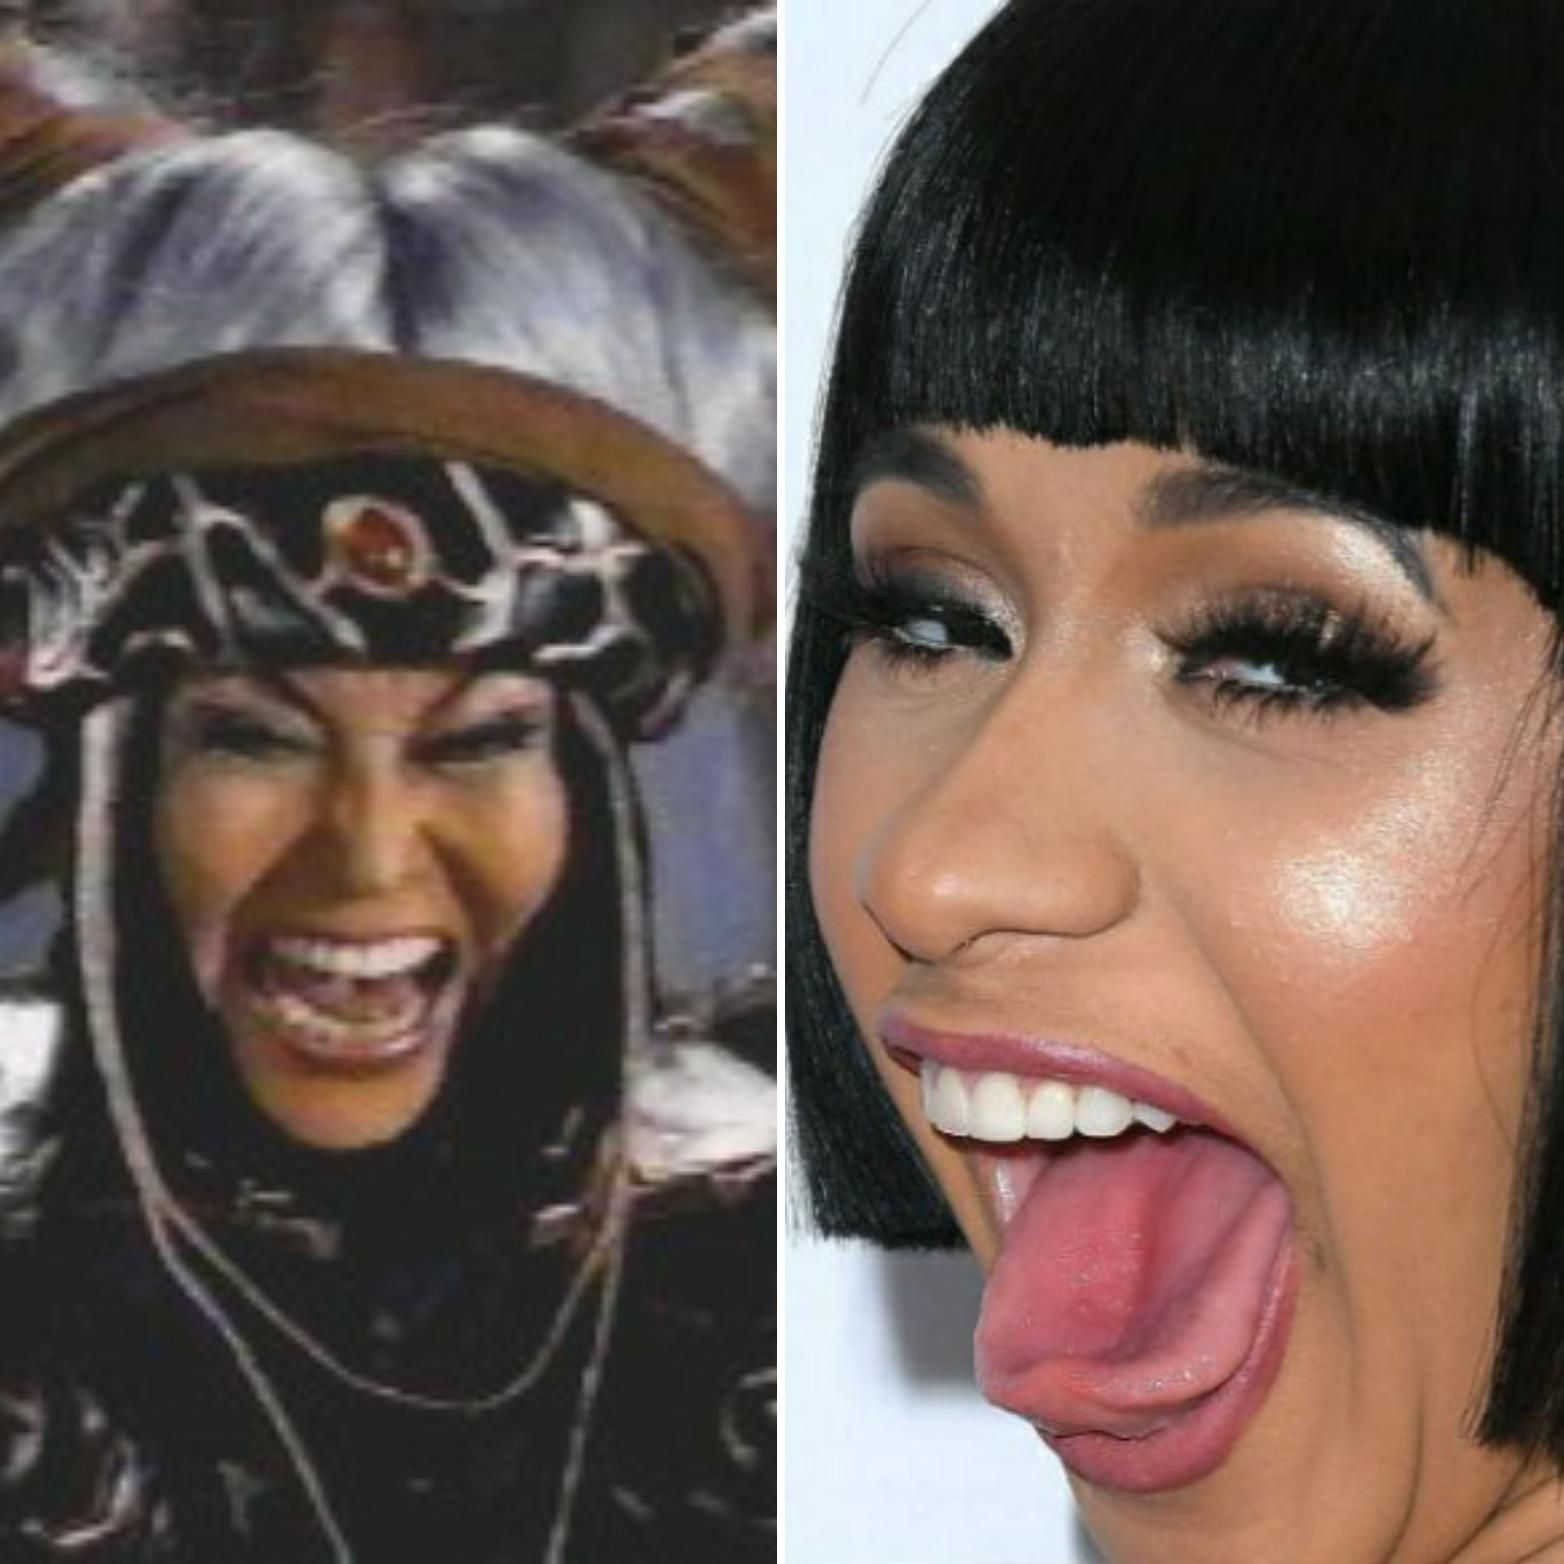 While watching Power Rangers my daughter said "Cardi B has been trying to take over the world for a while now."